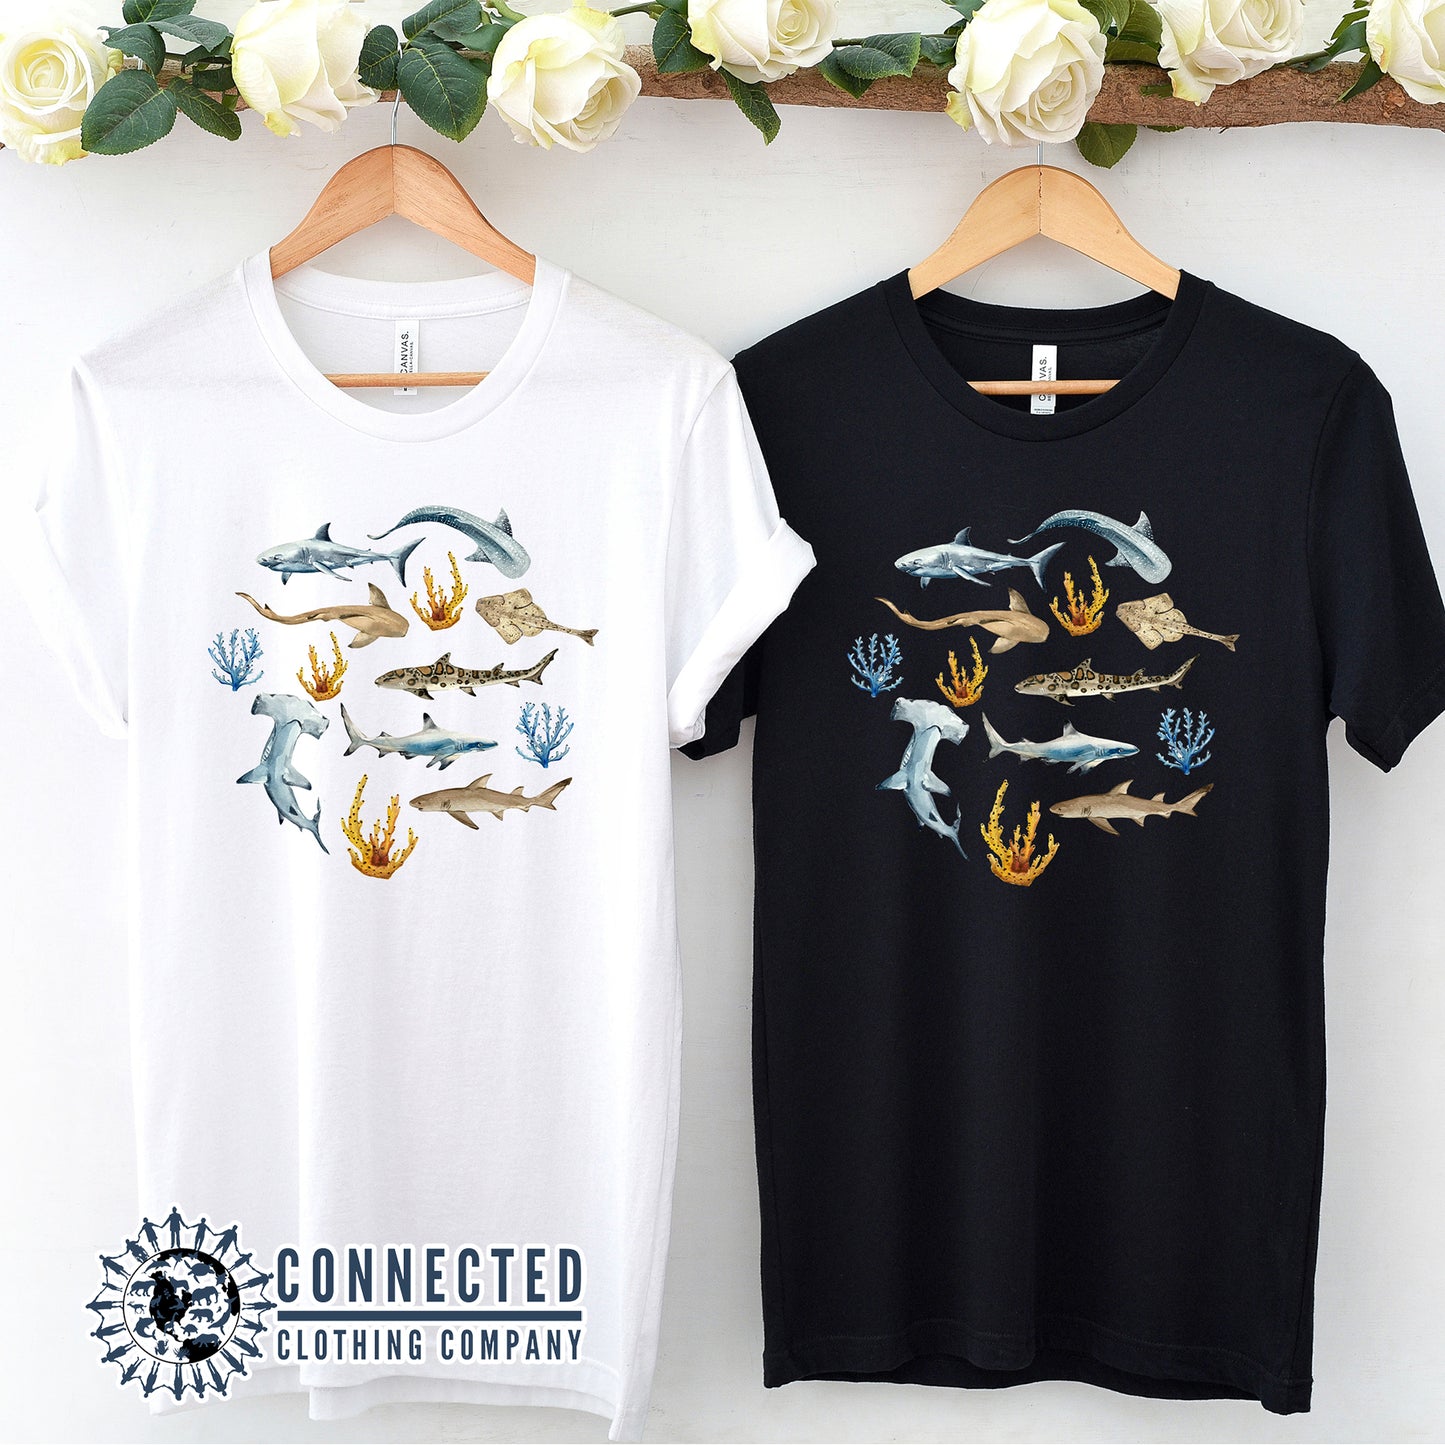 Hanging White and Black Shark Ocean Watercolor Unisex Short-Sleeve Tshirt - sweetsherriloudesigns - Ethically and Sustainably Made - 10% of profits donated to shark conservation and ocean conservation